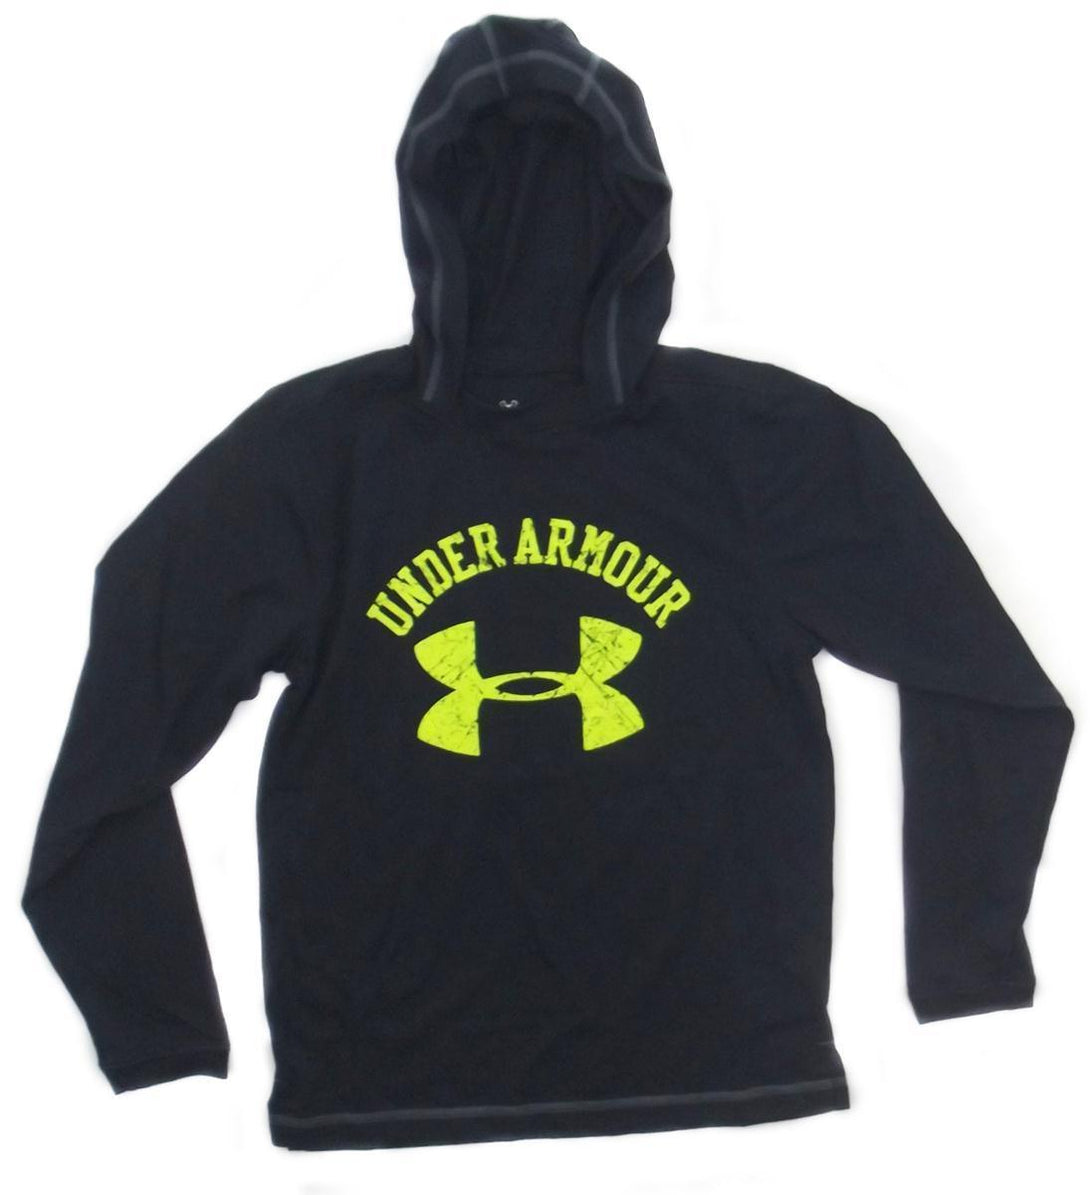 Rugby Heaven Under Armour Collegiate Kids Black/Green Hooded Top - www.rugby-heaven.co.uk